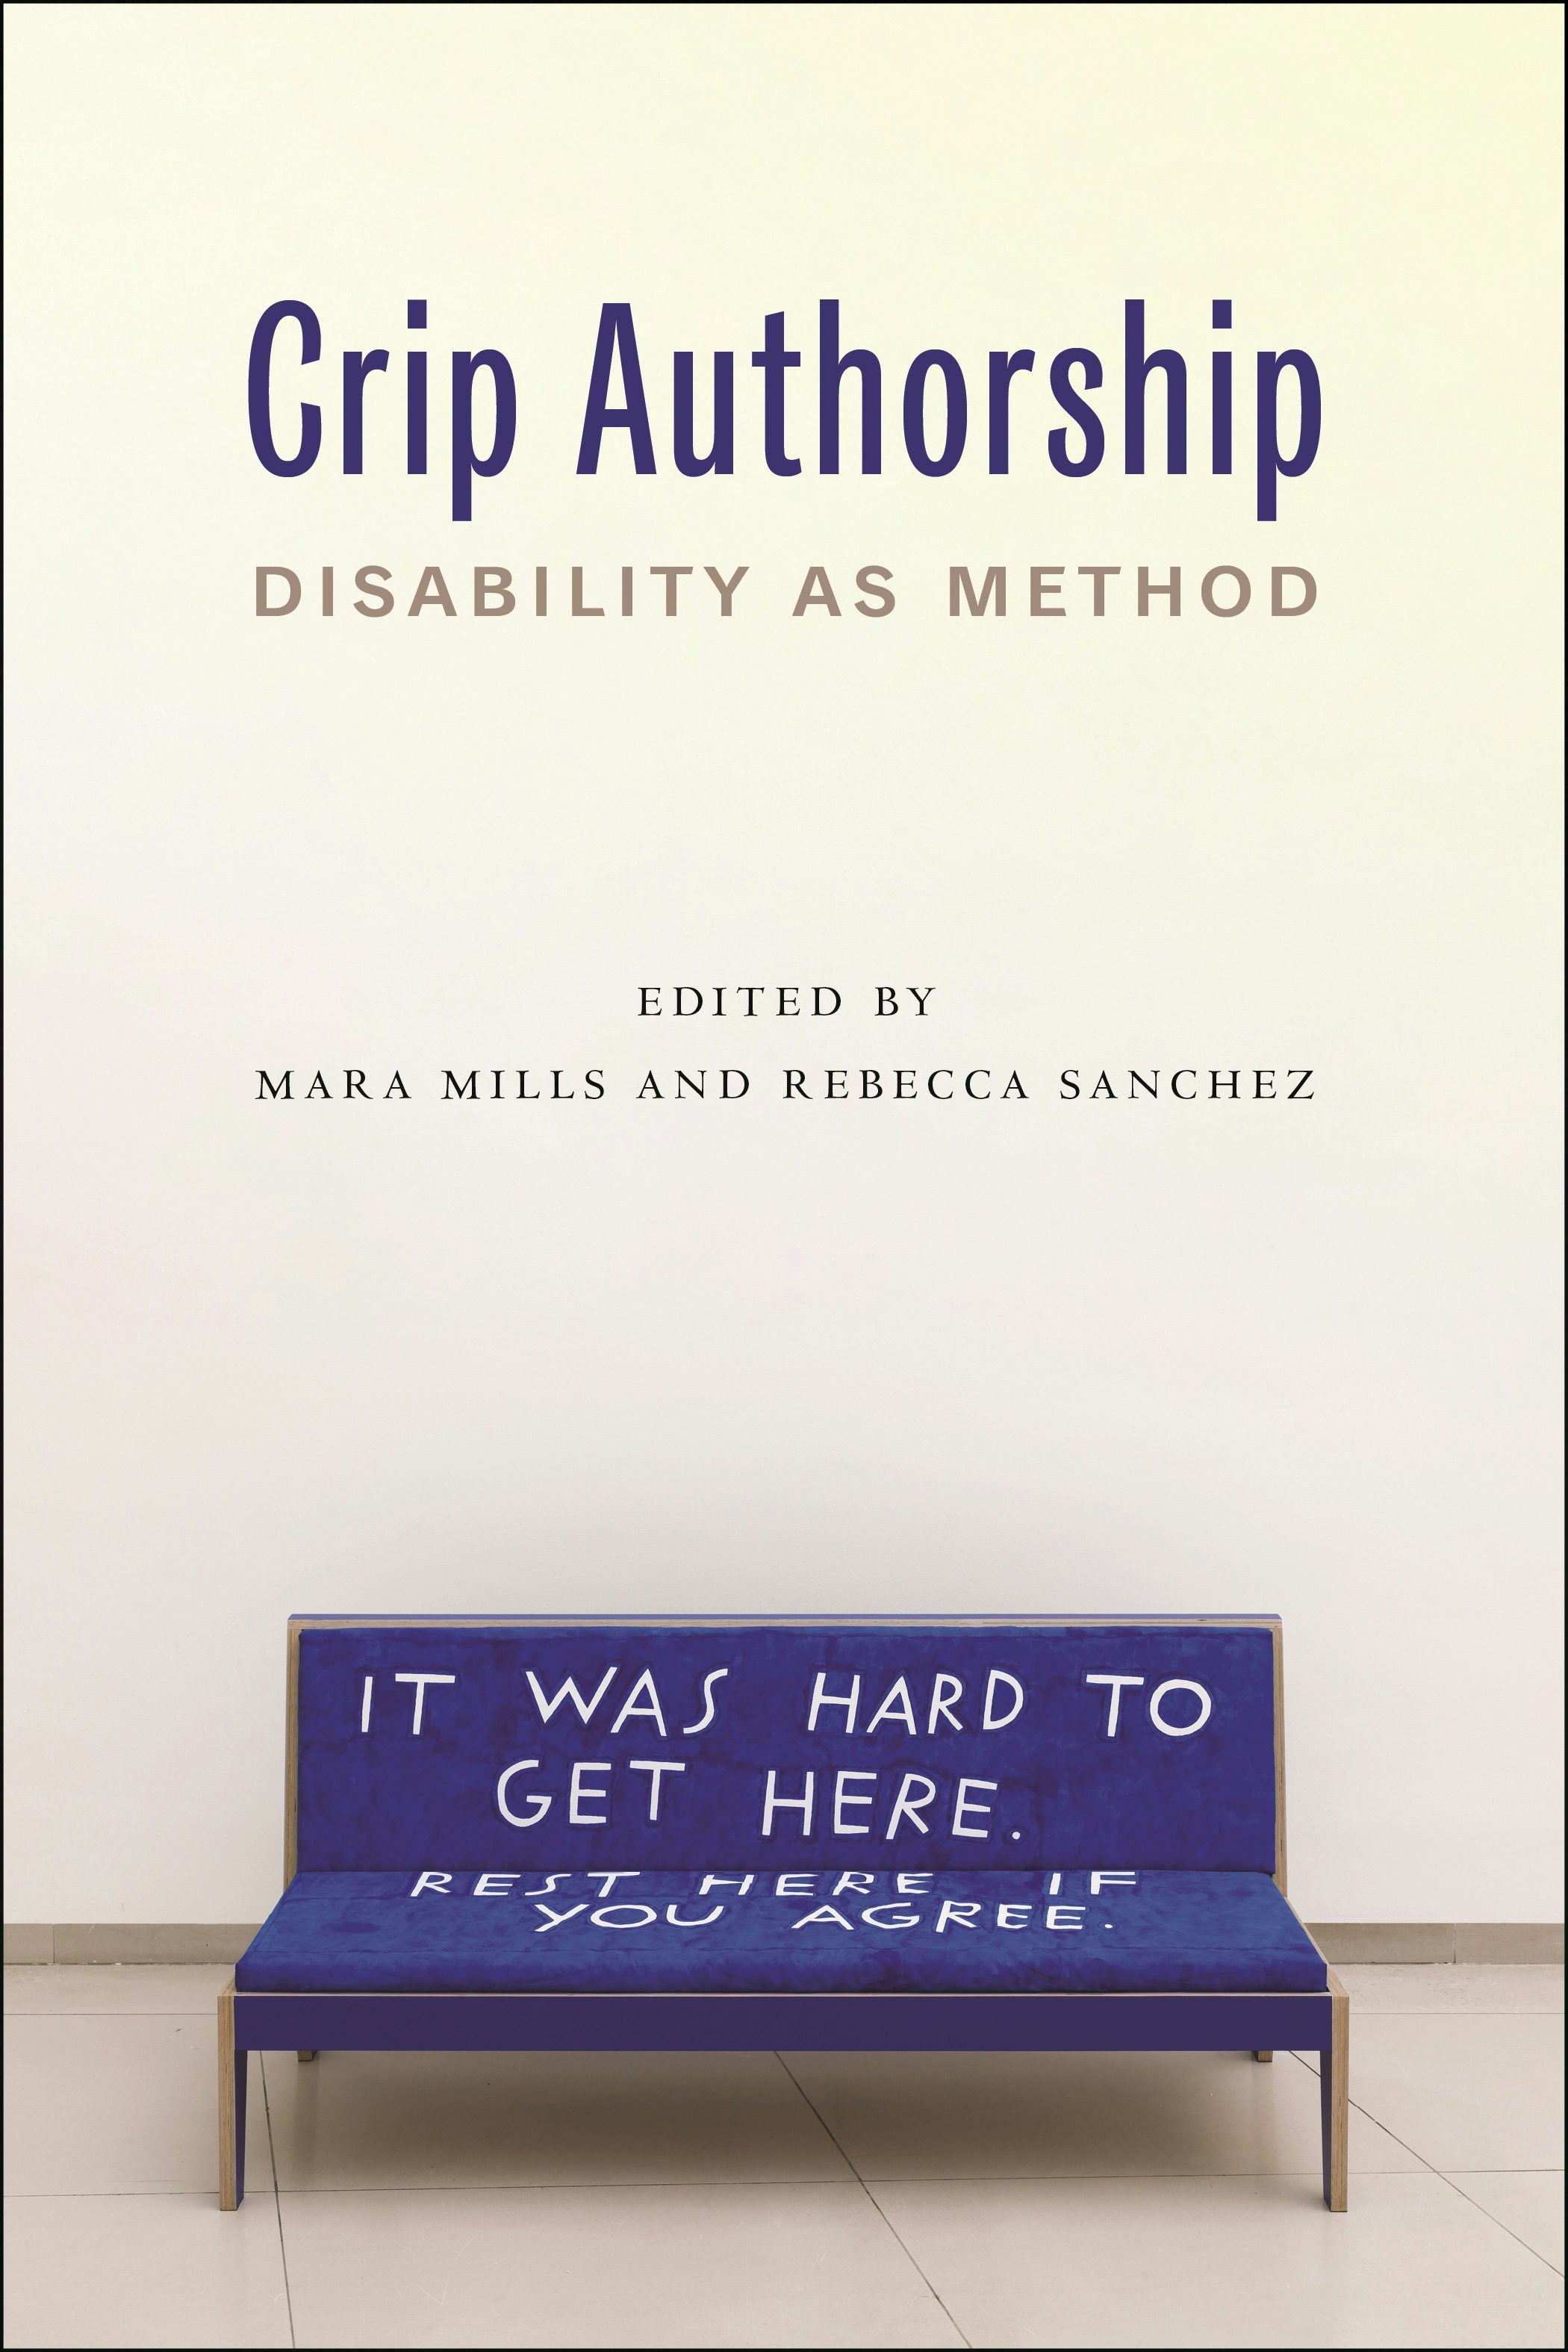 Book cover with title: Crip Authorship: Disability as Method. Edited by Mara Mills and Rebecca Sanchez. Cover is white with a photo of a cushioned bench with big text running across it that reads, It was hard to get here. Rest here if you agree. The text is hand-painted and a little uneven. White letters in a field of vibrant blue. By Finnegan Shannon. Do You Want Us Here or Not (MMK), 2021